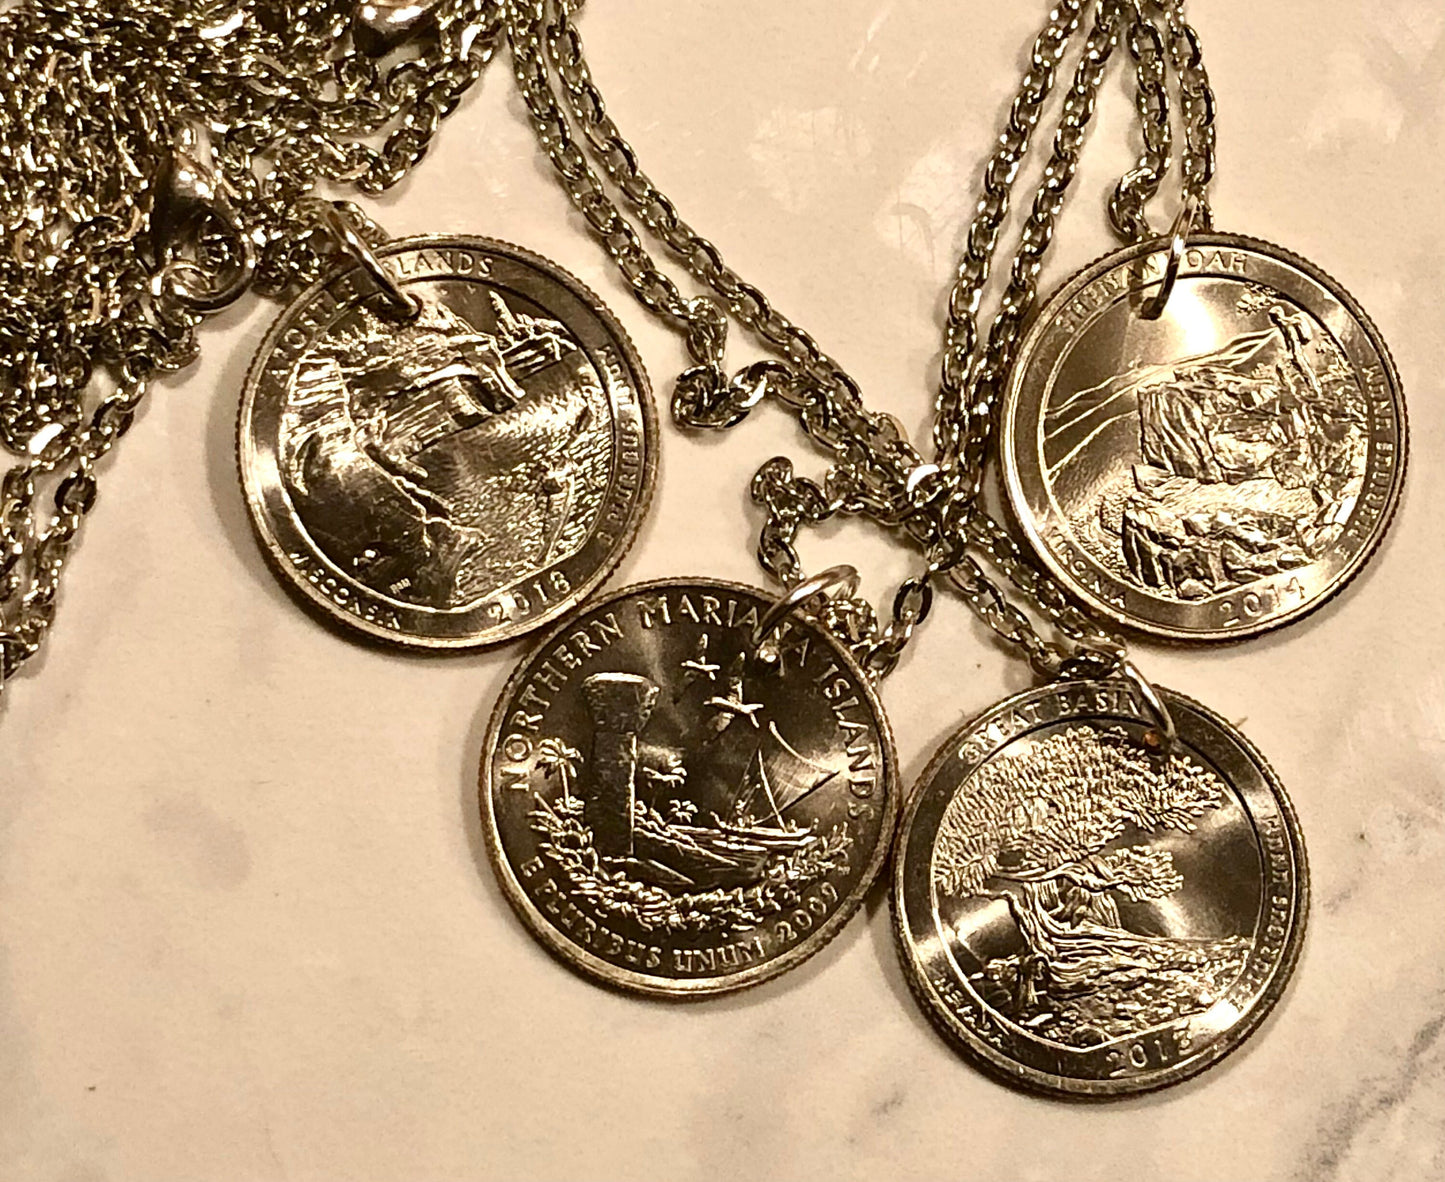 Parks Quarter Pendant United States America USA Coin Necklace Custom Charm Gift For Friend Charm Gift For Him, Coin Collector, World Coins